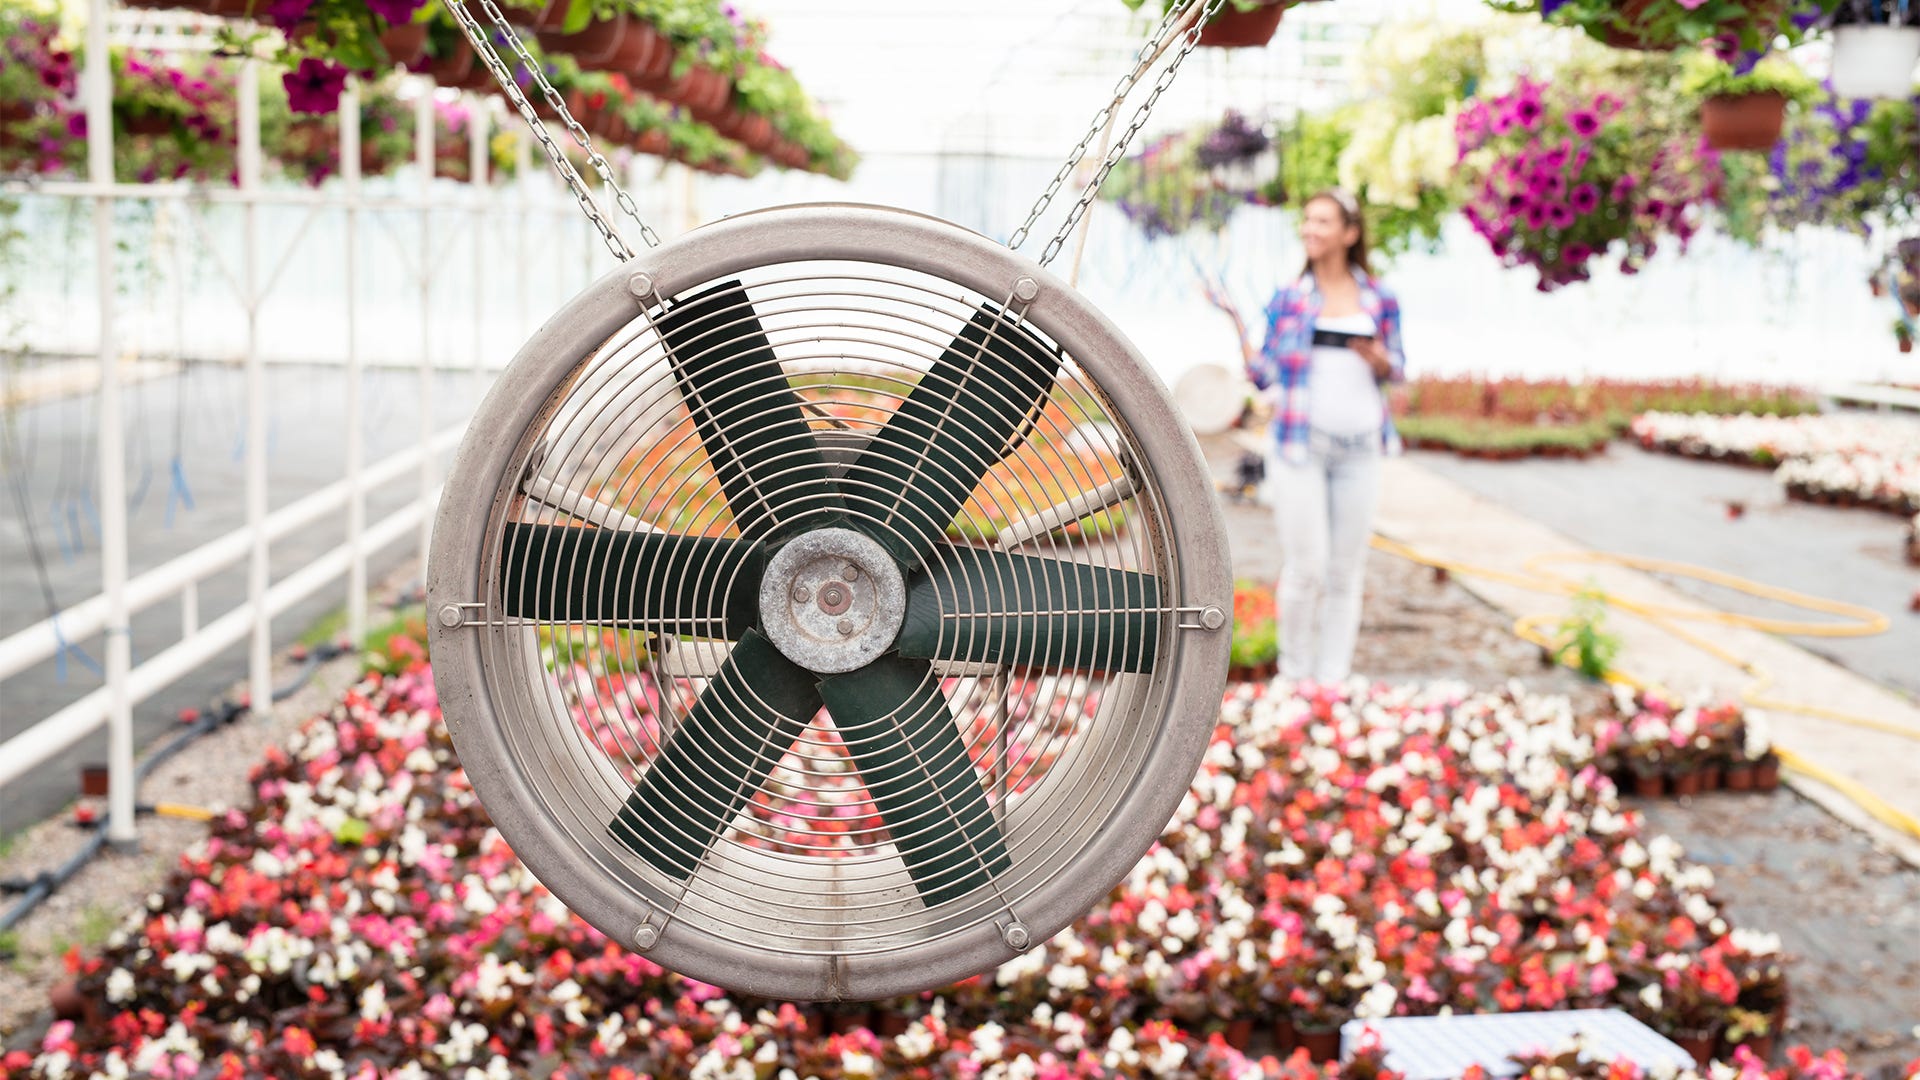 Why Do I Need A Fan In My Indoor Garden?